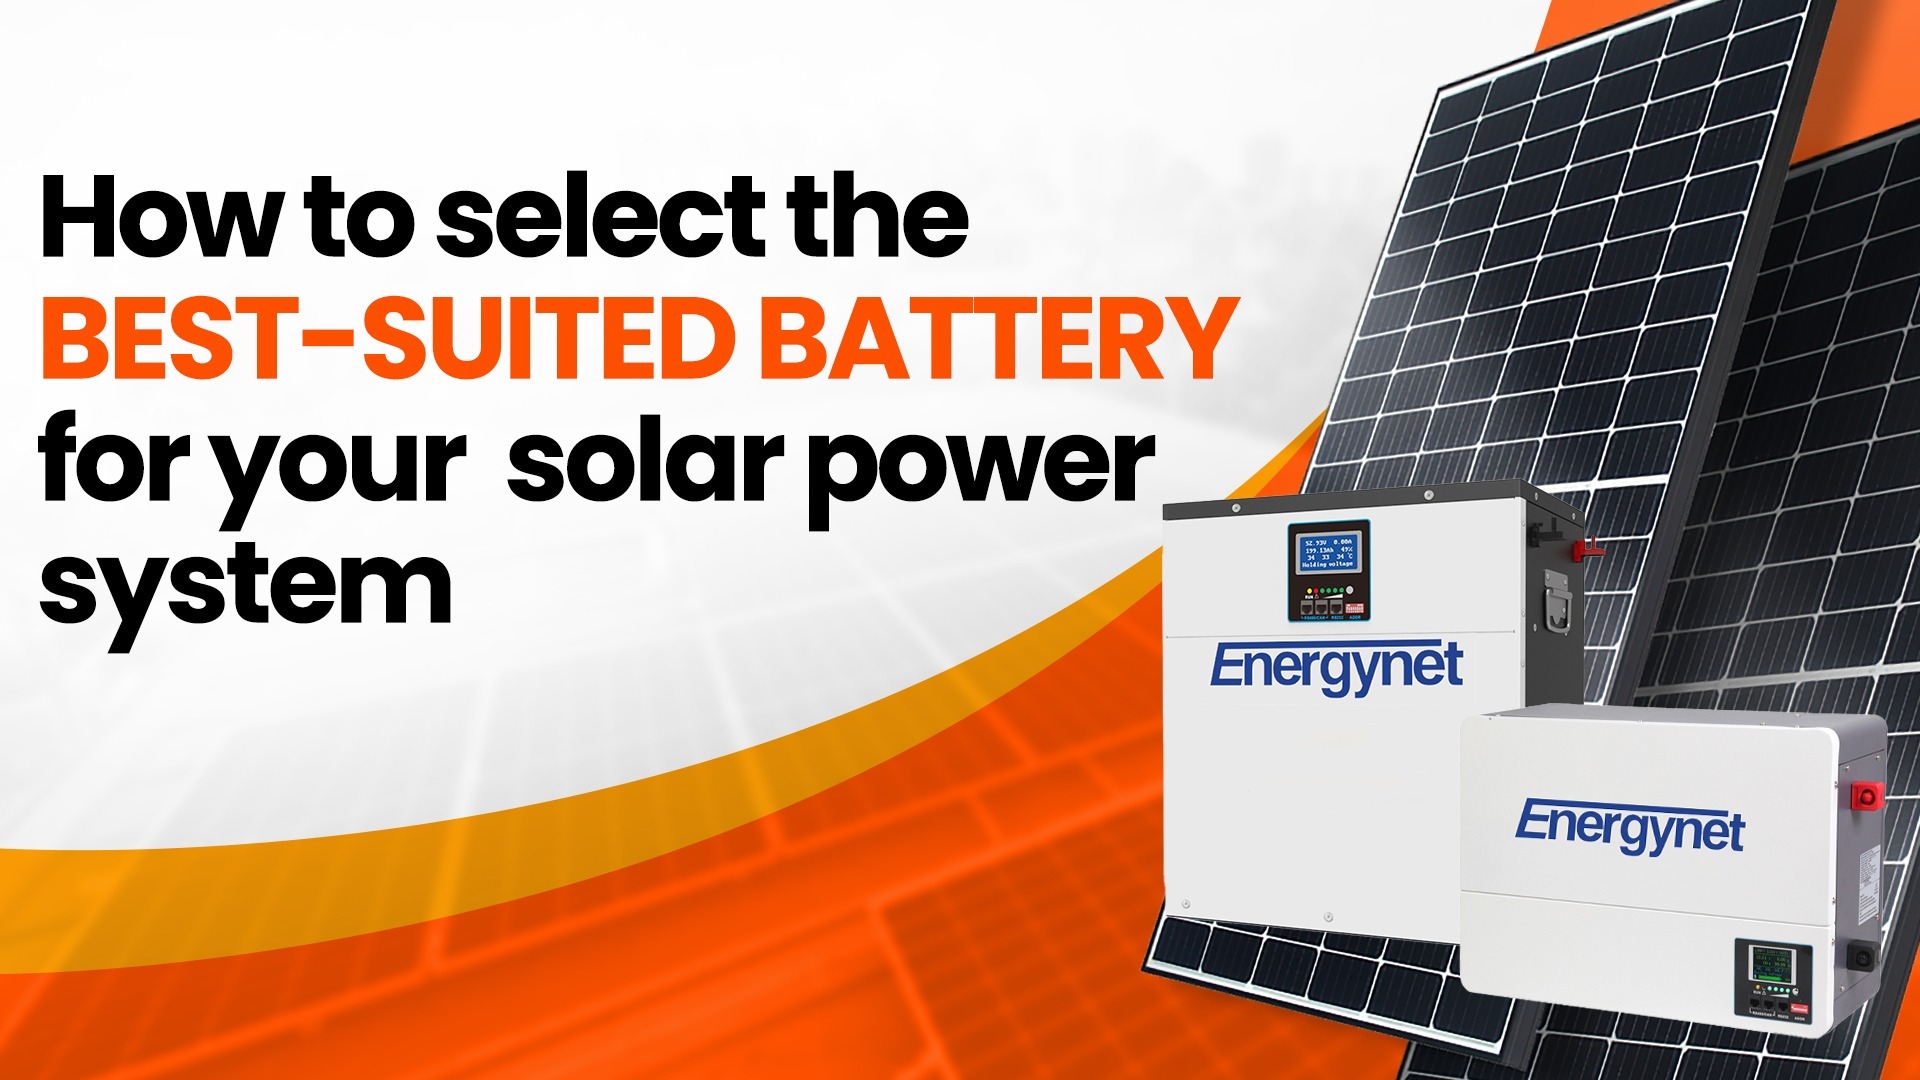 How to select the best suited battery for your solar system?